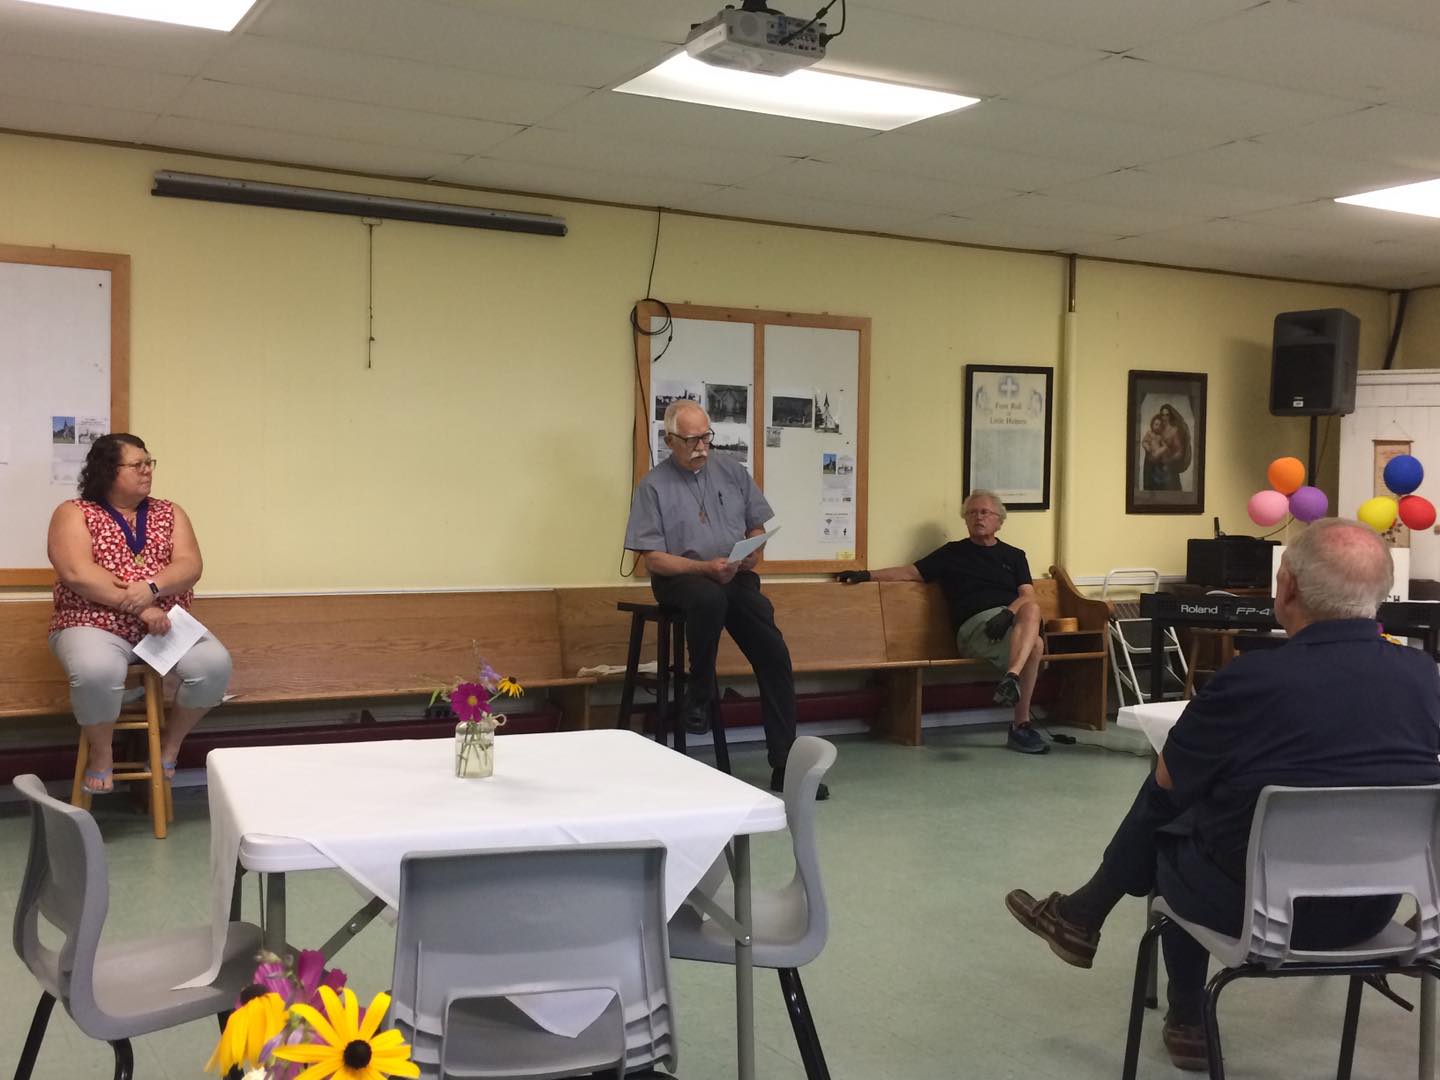 St. Luke's congregation enjoyed our second cafe church on Sunday, August 27th. A special thanks to everyone who made these services possible, especially Rev. Jerry Cavanaugh who led us in Morning Prayer.